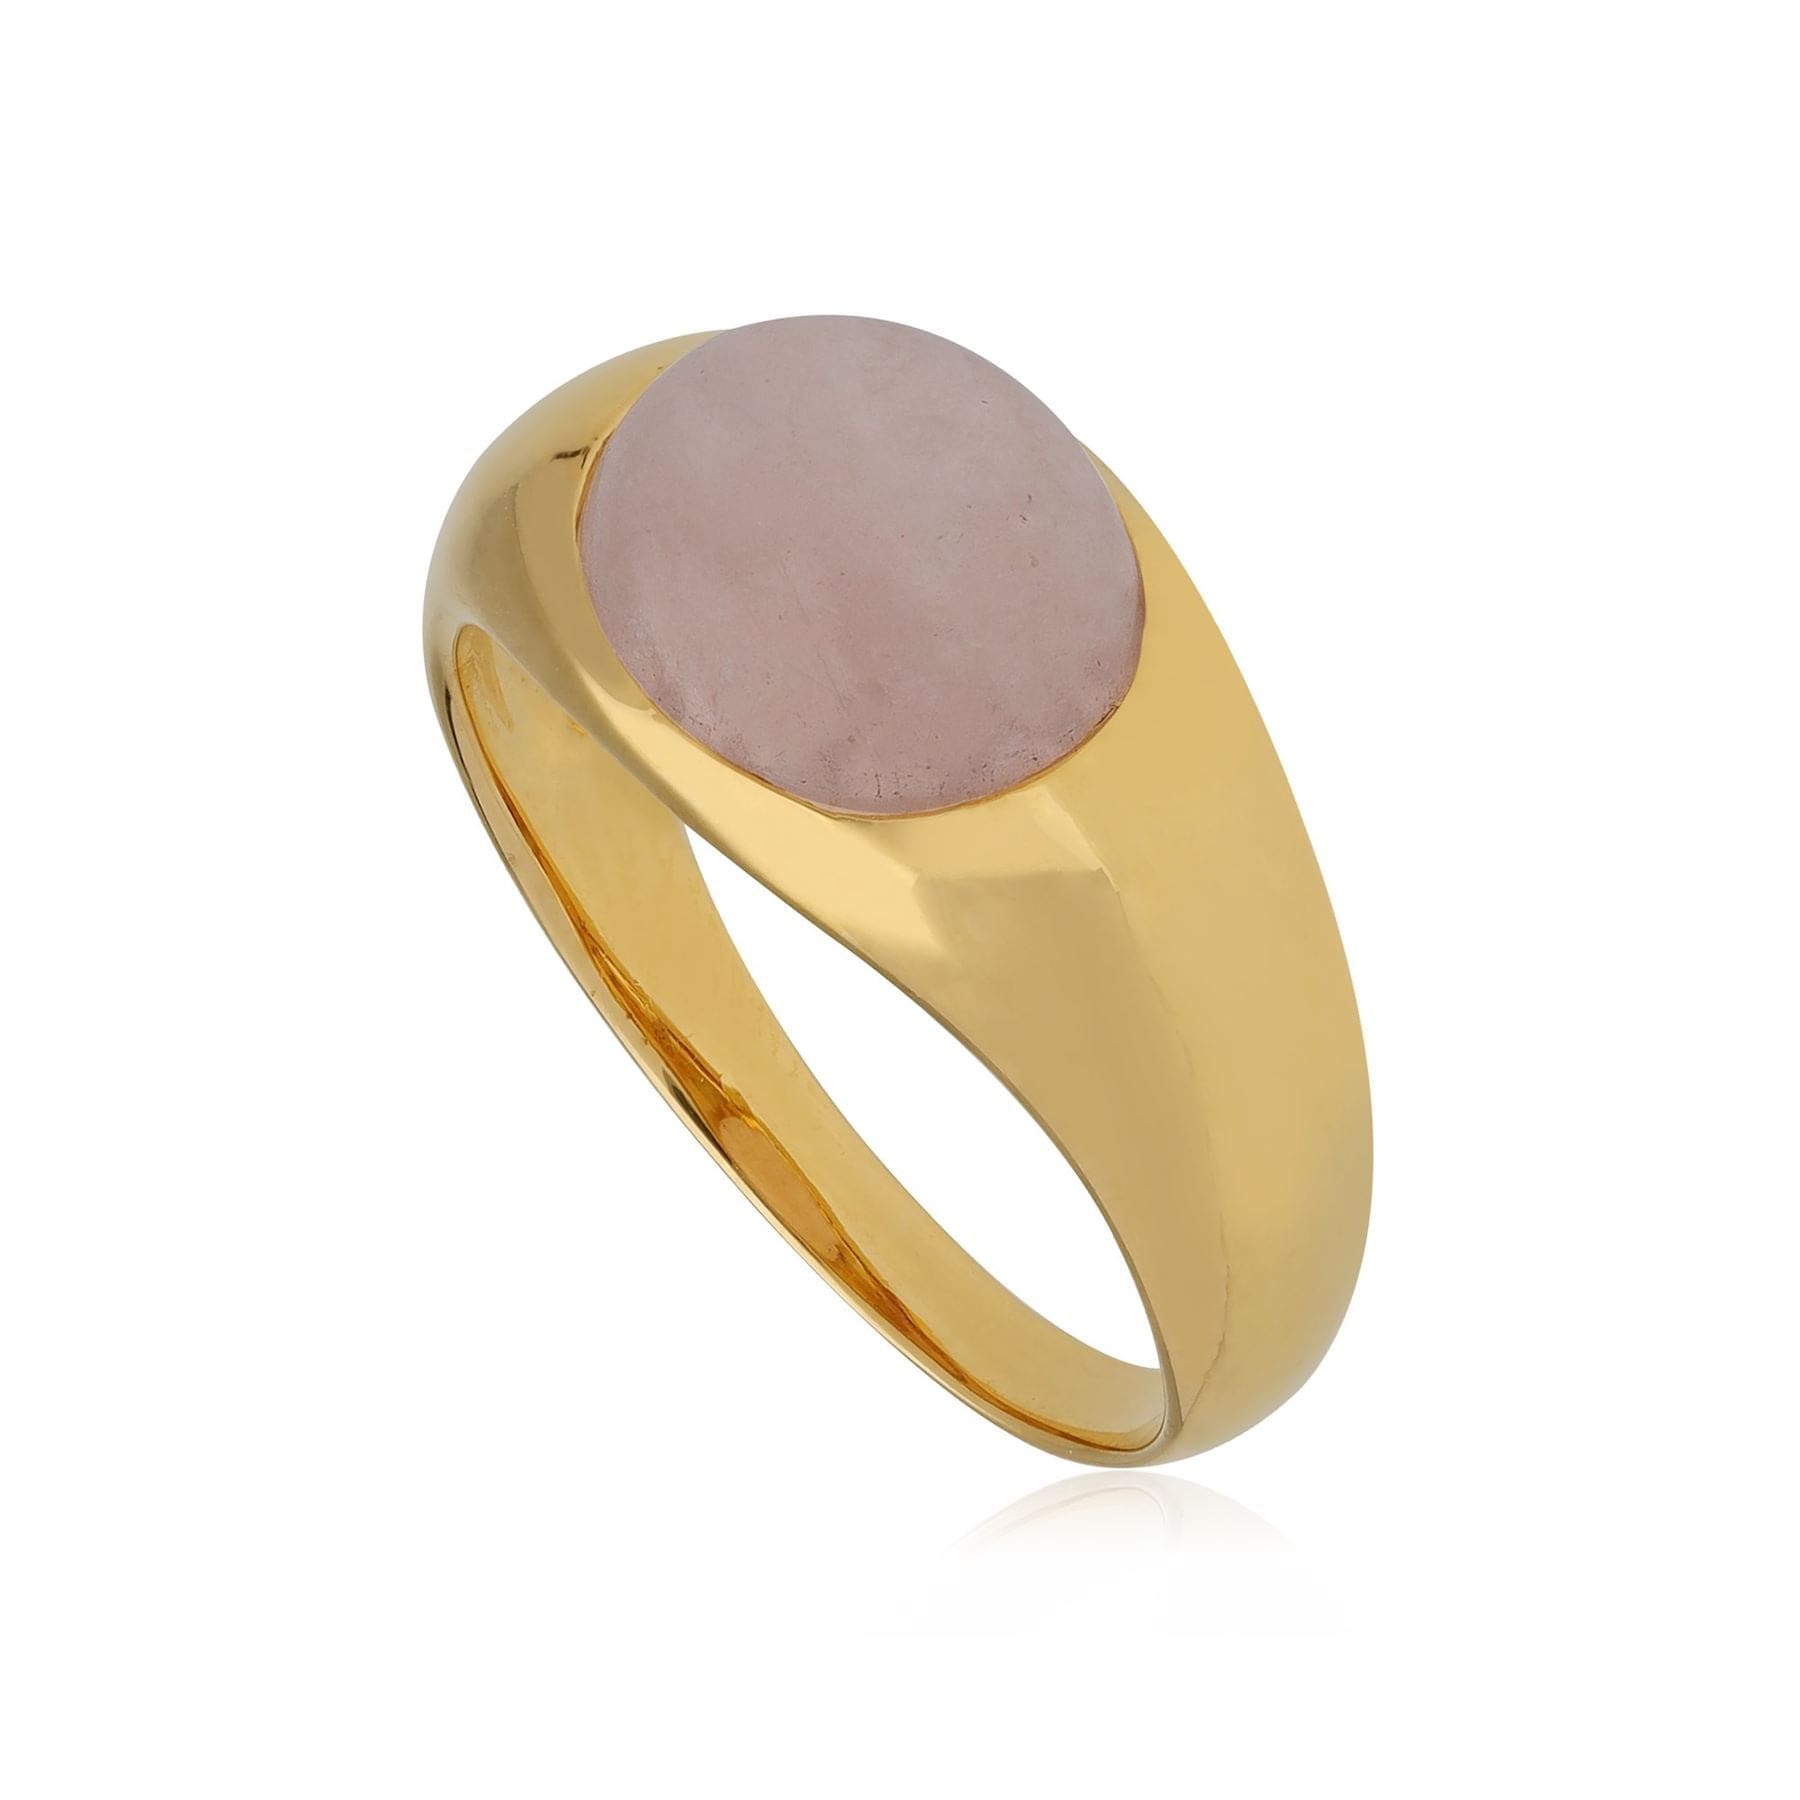 Kosmos Morganite Cocktail Ring in Gold Plated Sterling Silver - Gemondo